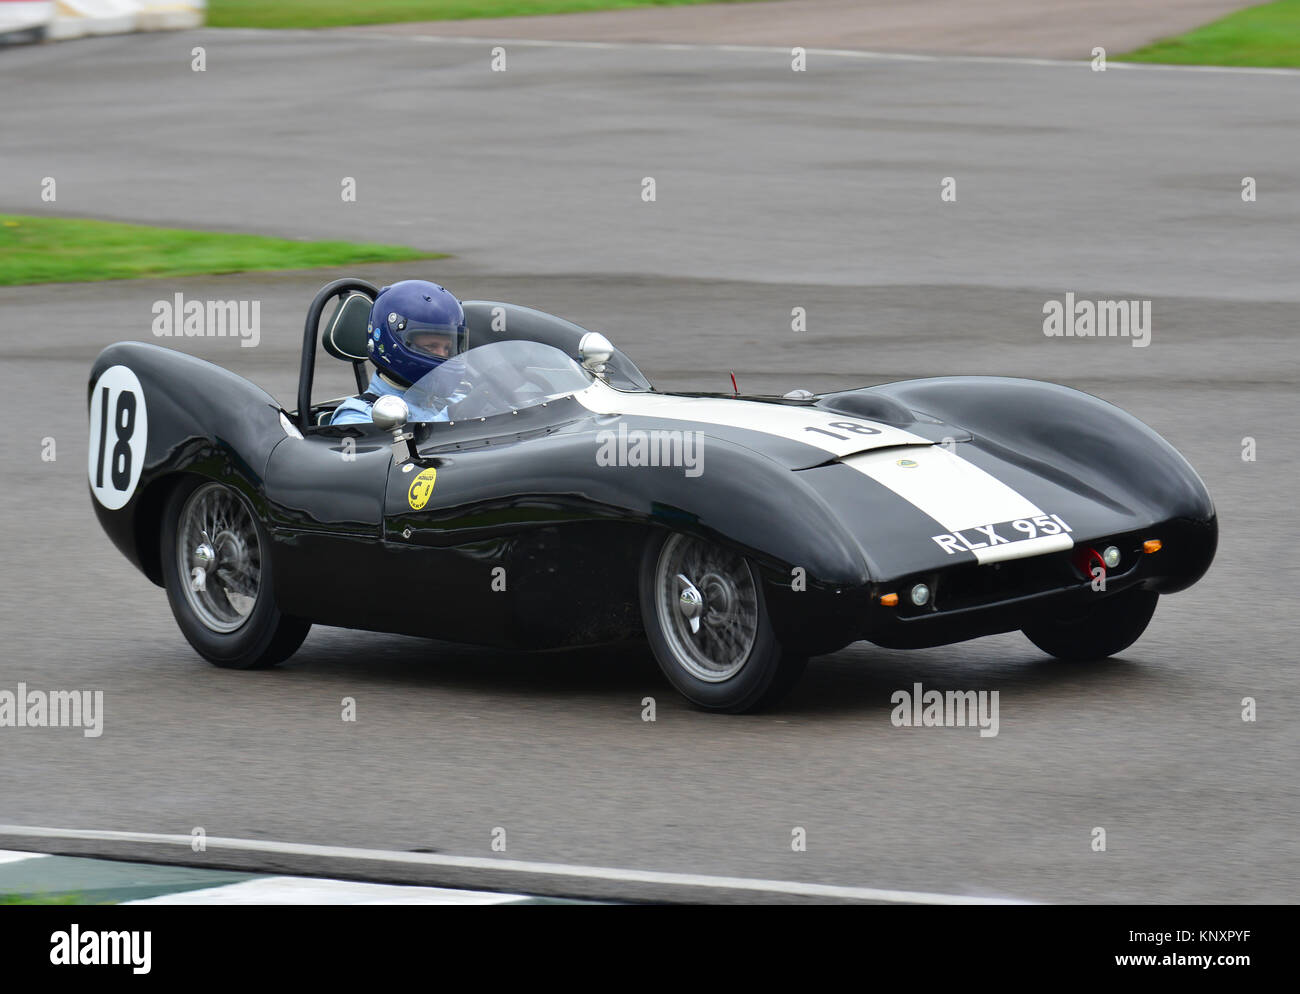 Nick Fennell, Lotus Climax Mk IX, Goodwood Revival 2013, madgwick Schale Stockfoto